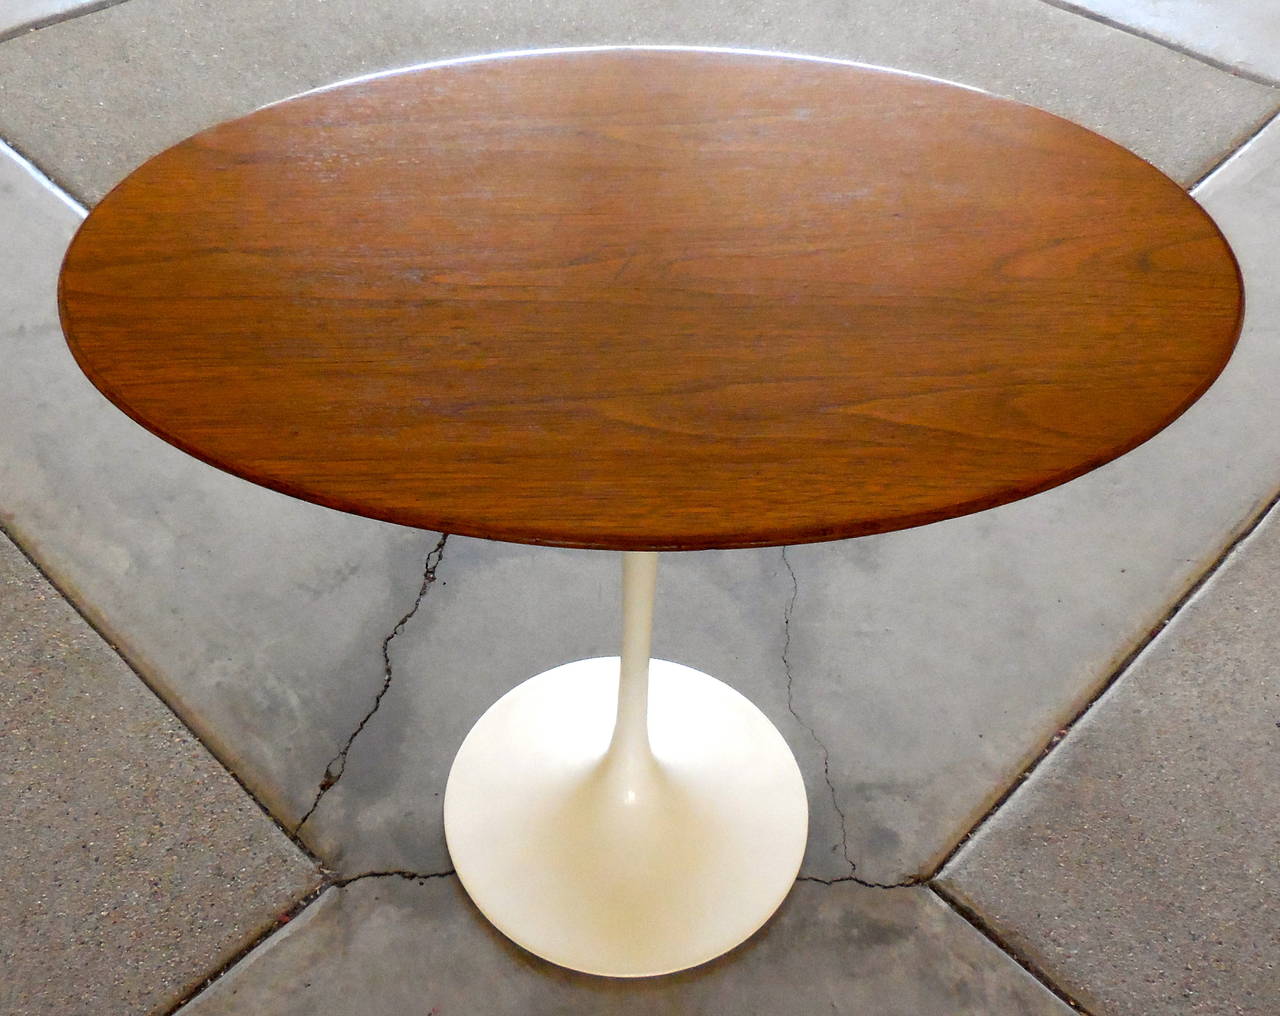 A handsome Eero Saarinen walnut on white powder coated steel base side table
by Knoll Associates, circa 1960s. Excellent vintage condition.